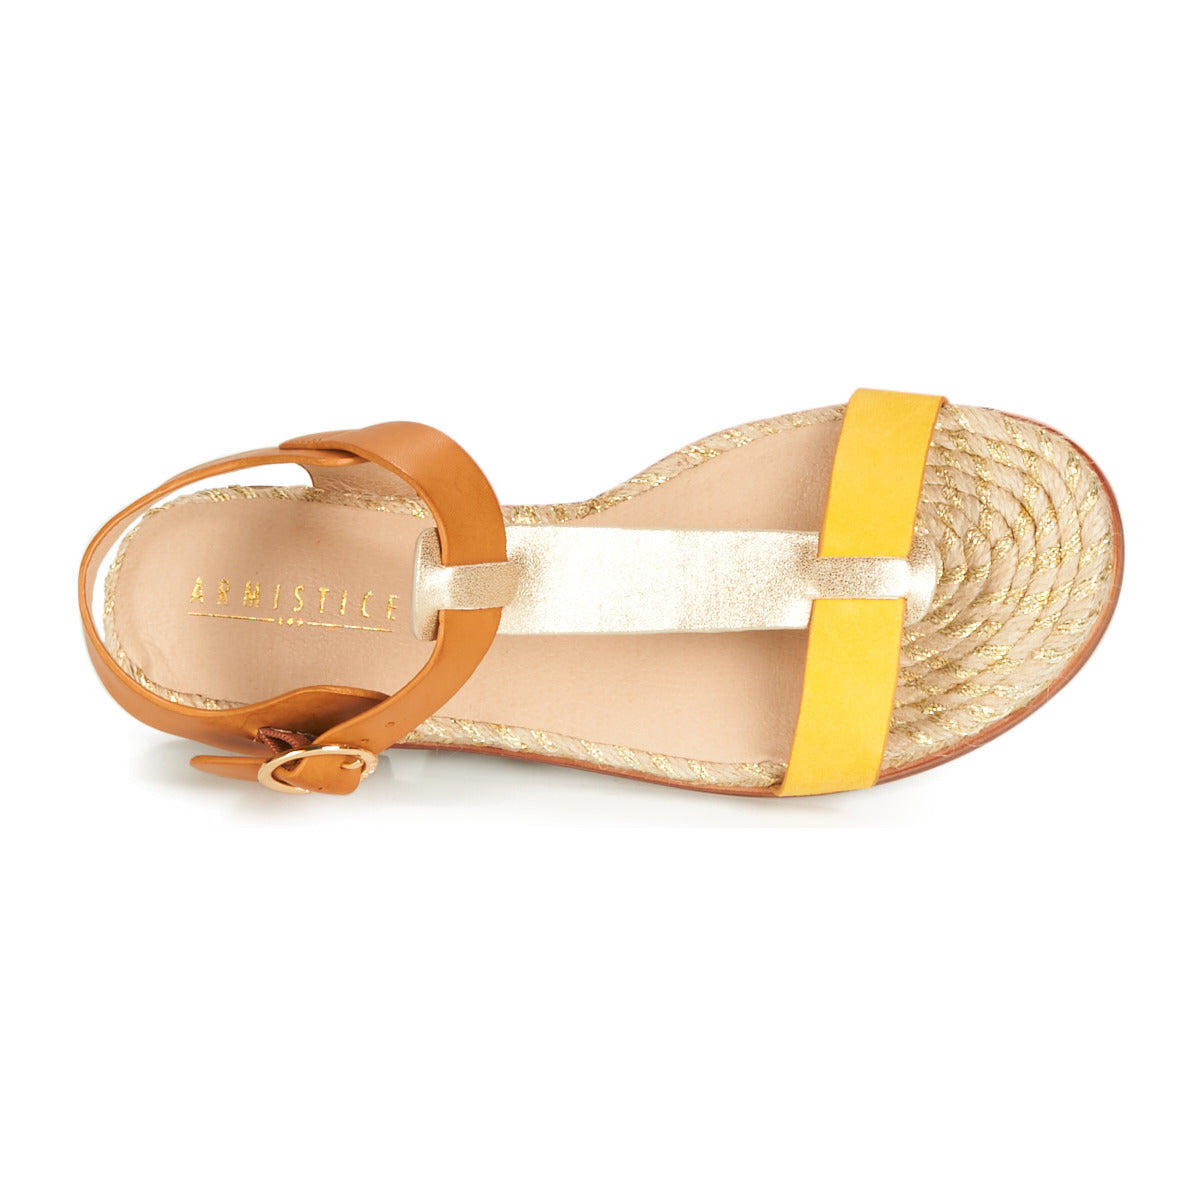 French Espadrille Style Sandals for Women with Leather Like Straps in Camel, Bright Yellow and Iridescent Gold colours 